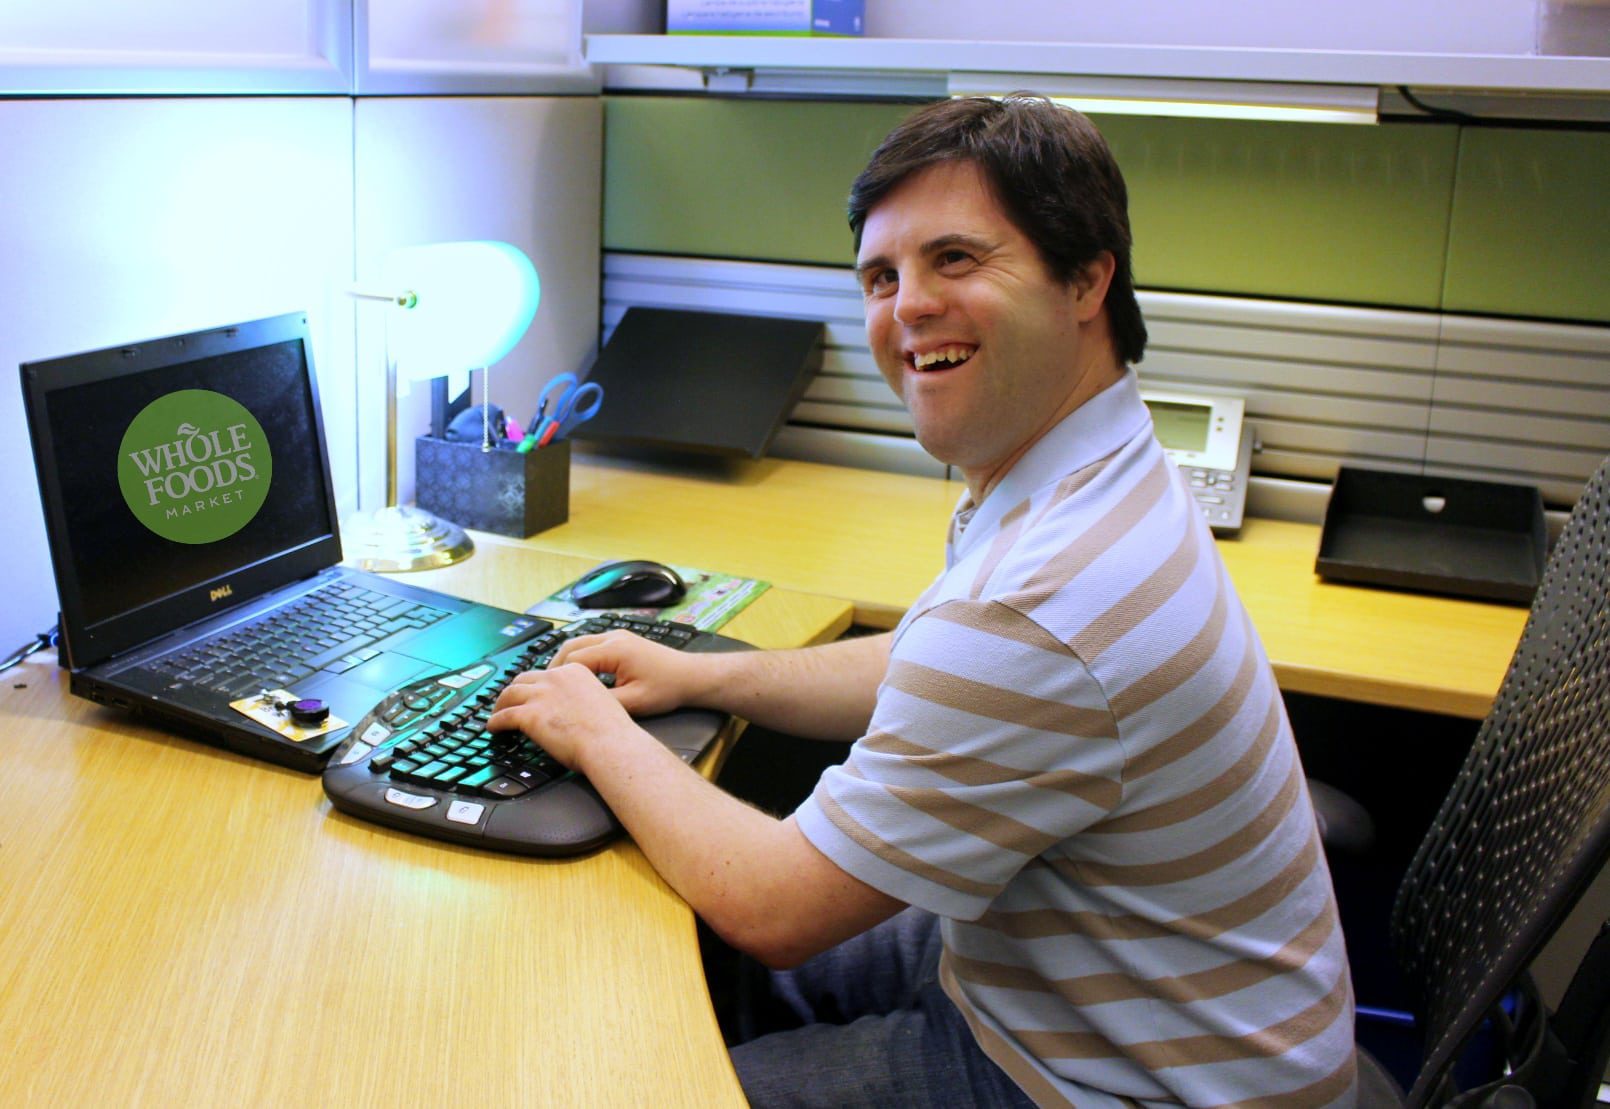 A smiling young resident is seated at a desk typing on a laptop computer.